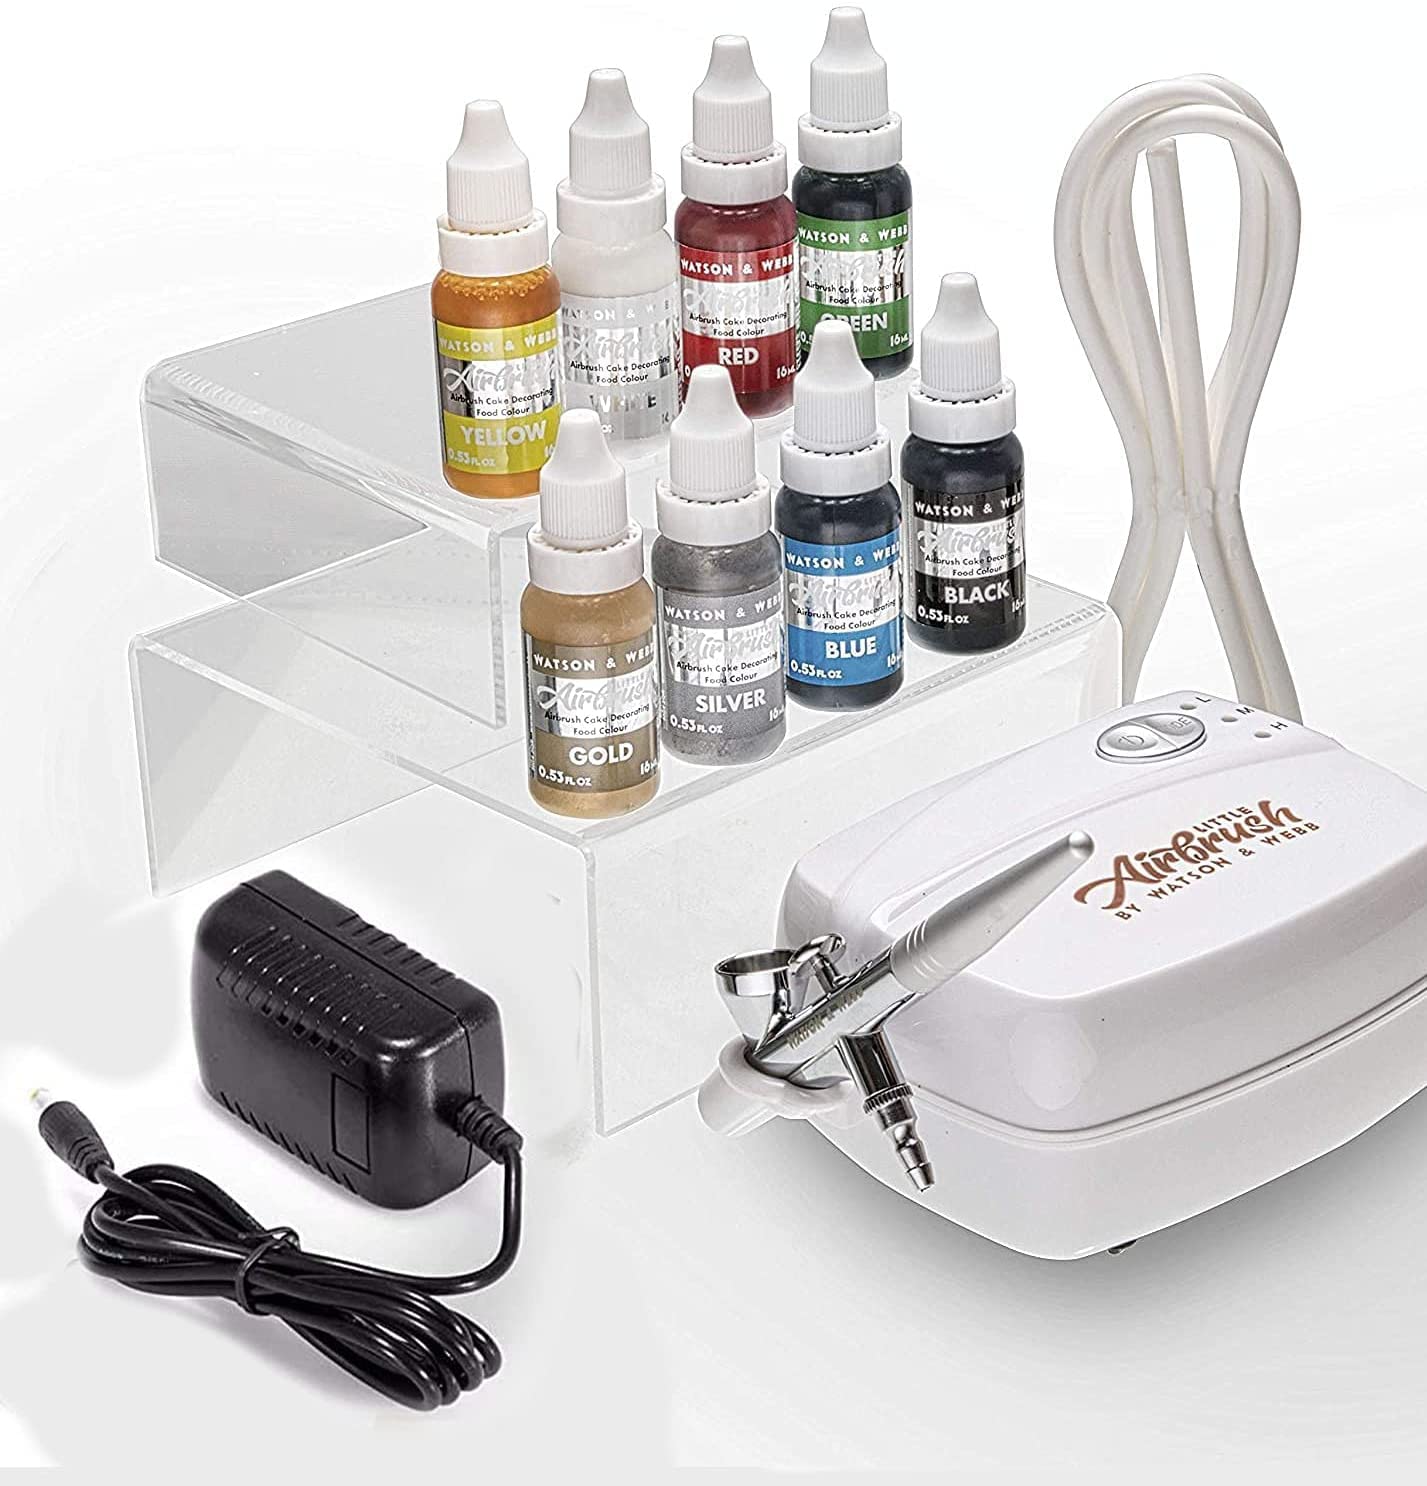 Watson & Webb Airbrush cake Decorating Kit Watson and Webb Airbrushing System for Baking with 8 colors